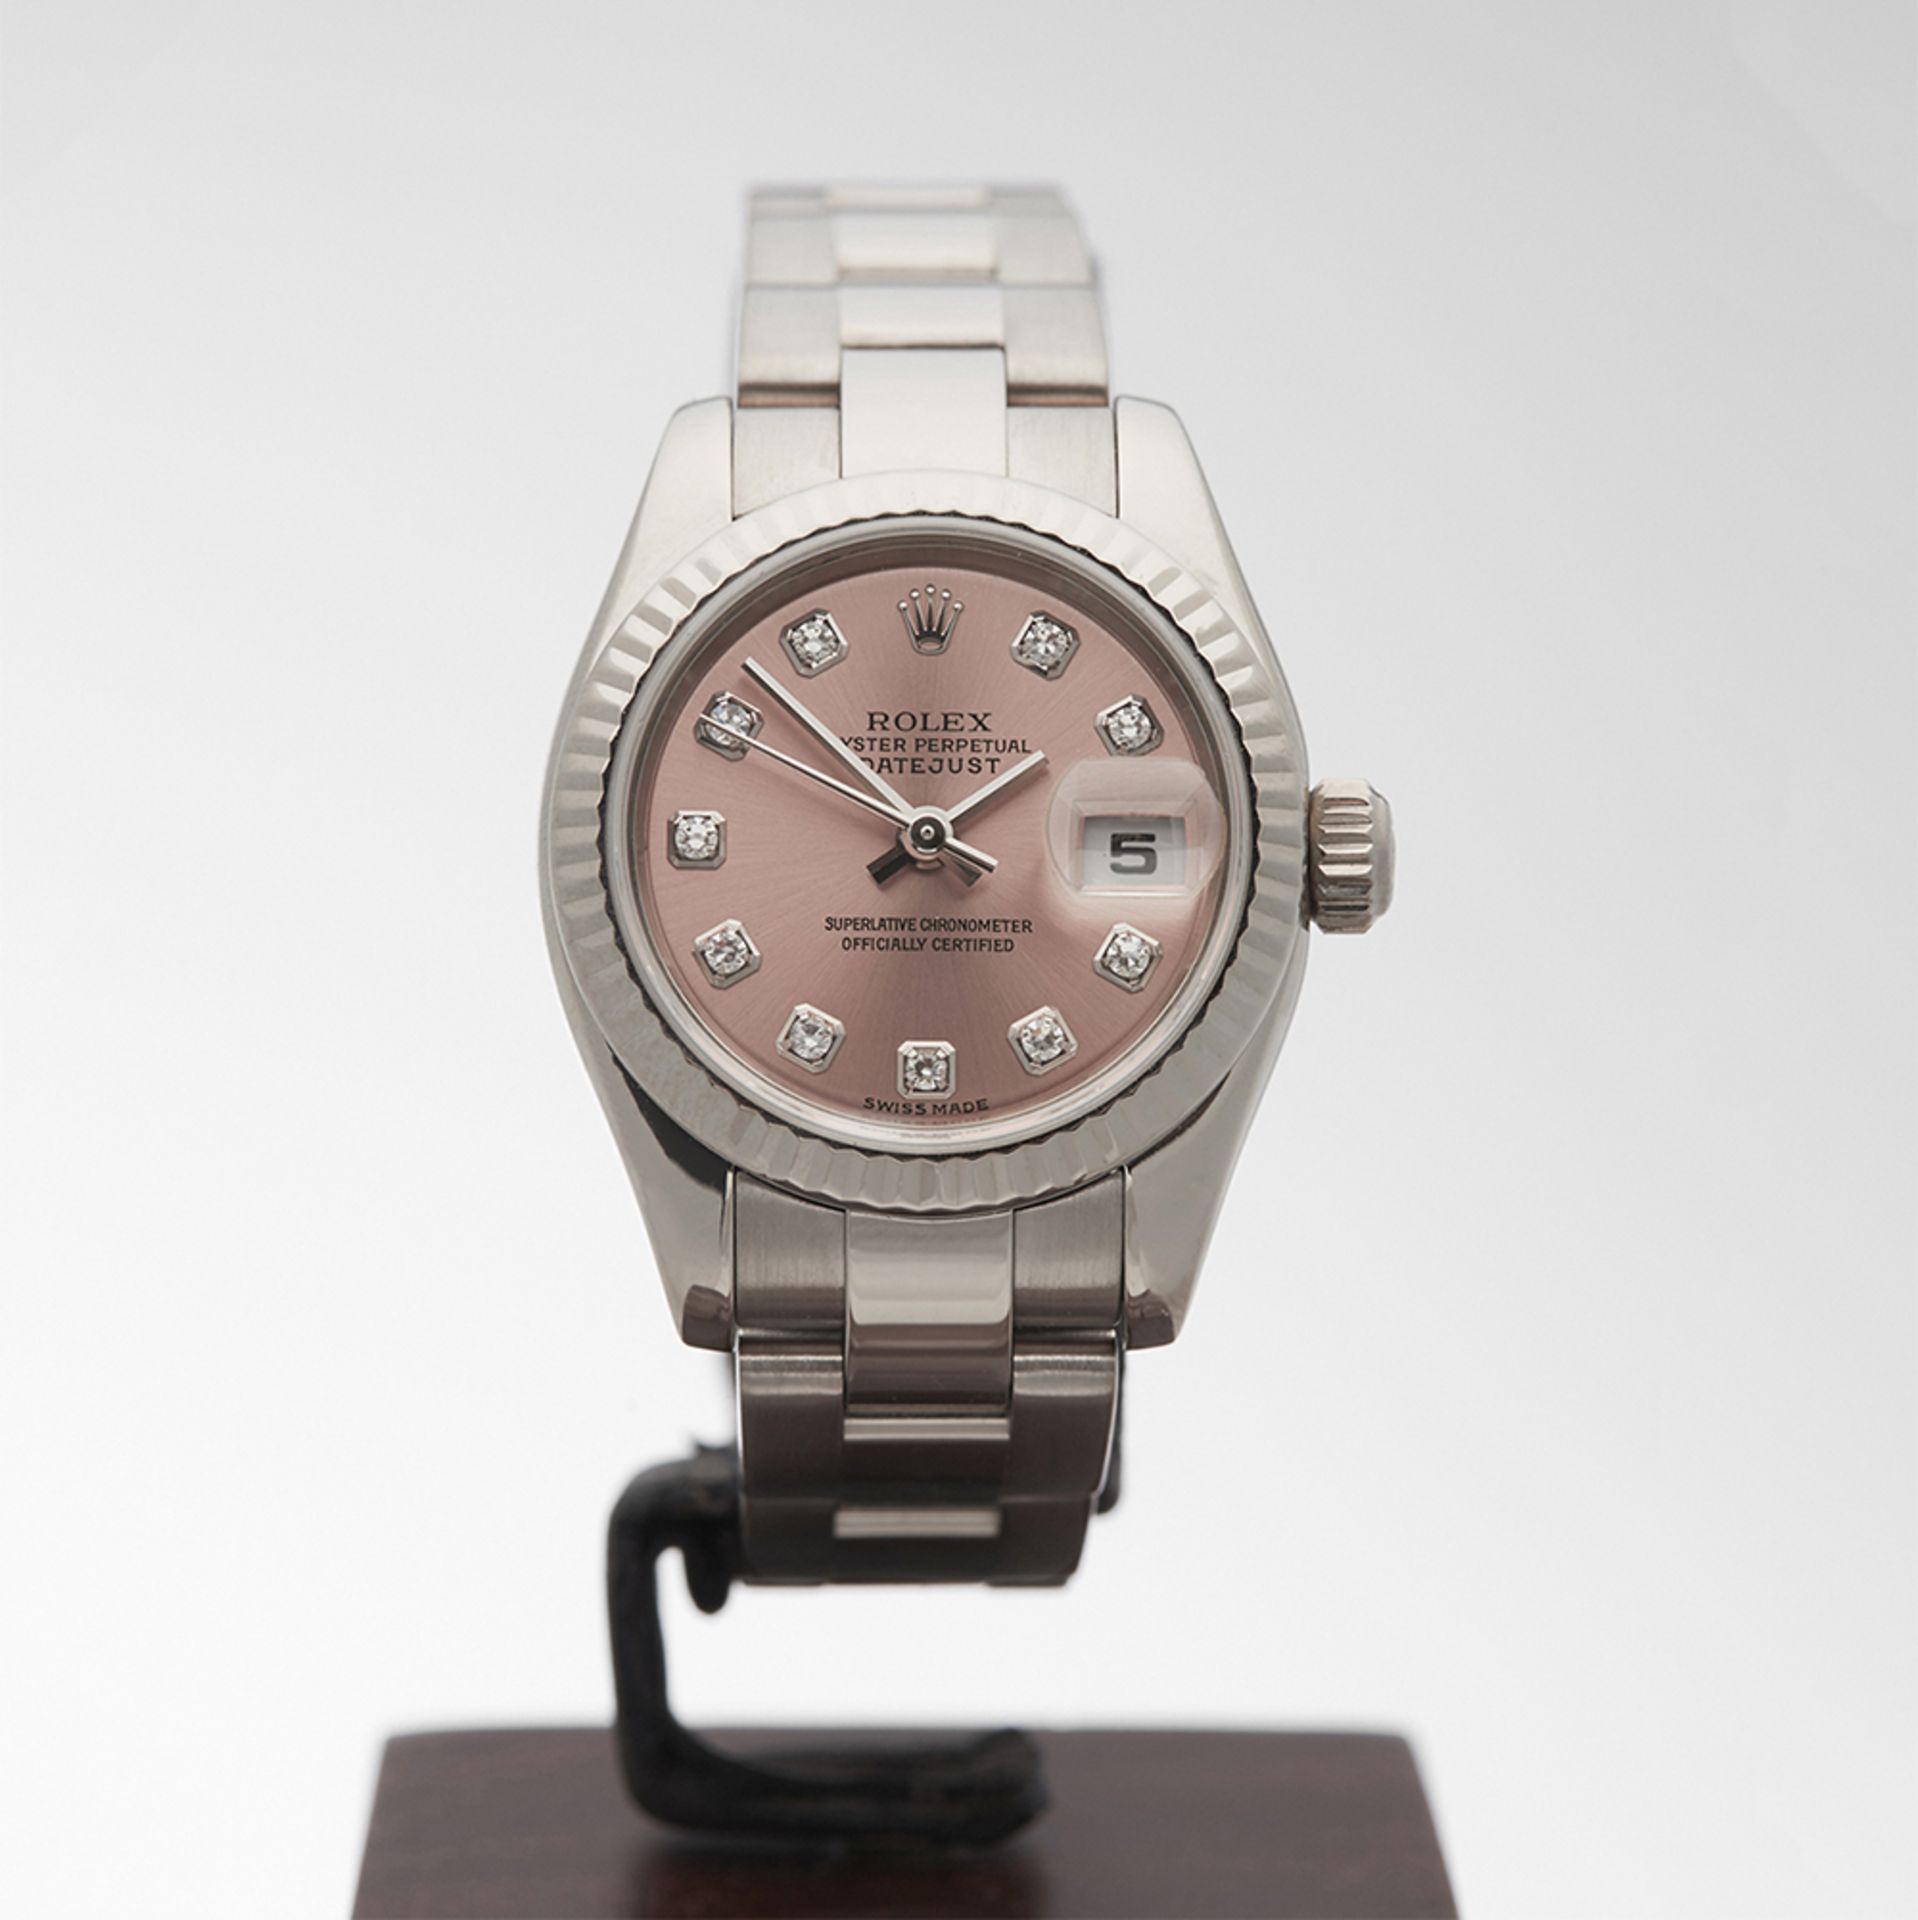 Rolex Datejust 26mm 18k White Gold - 179179 - Image 2 of 9